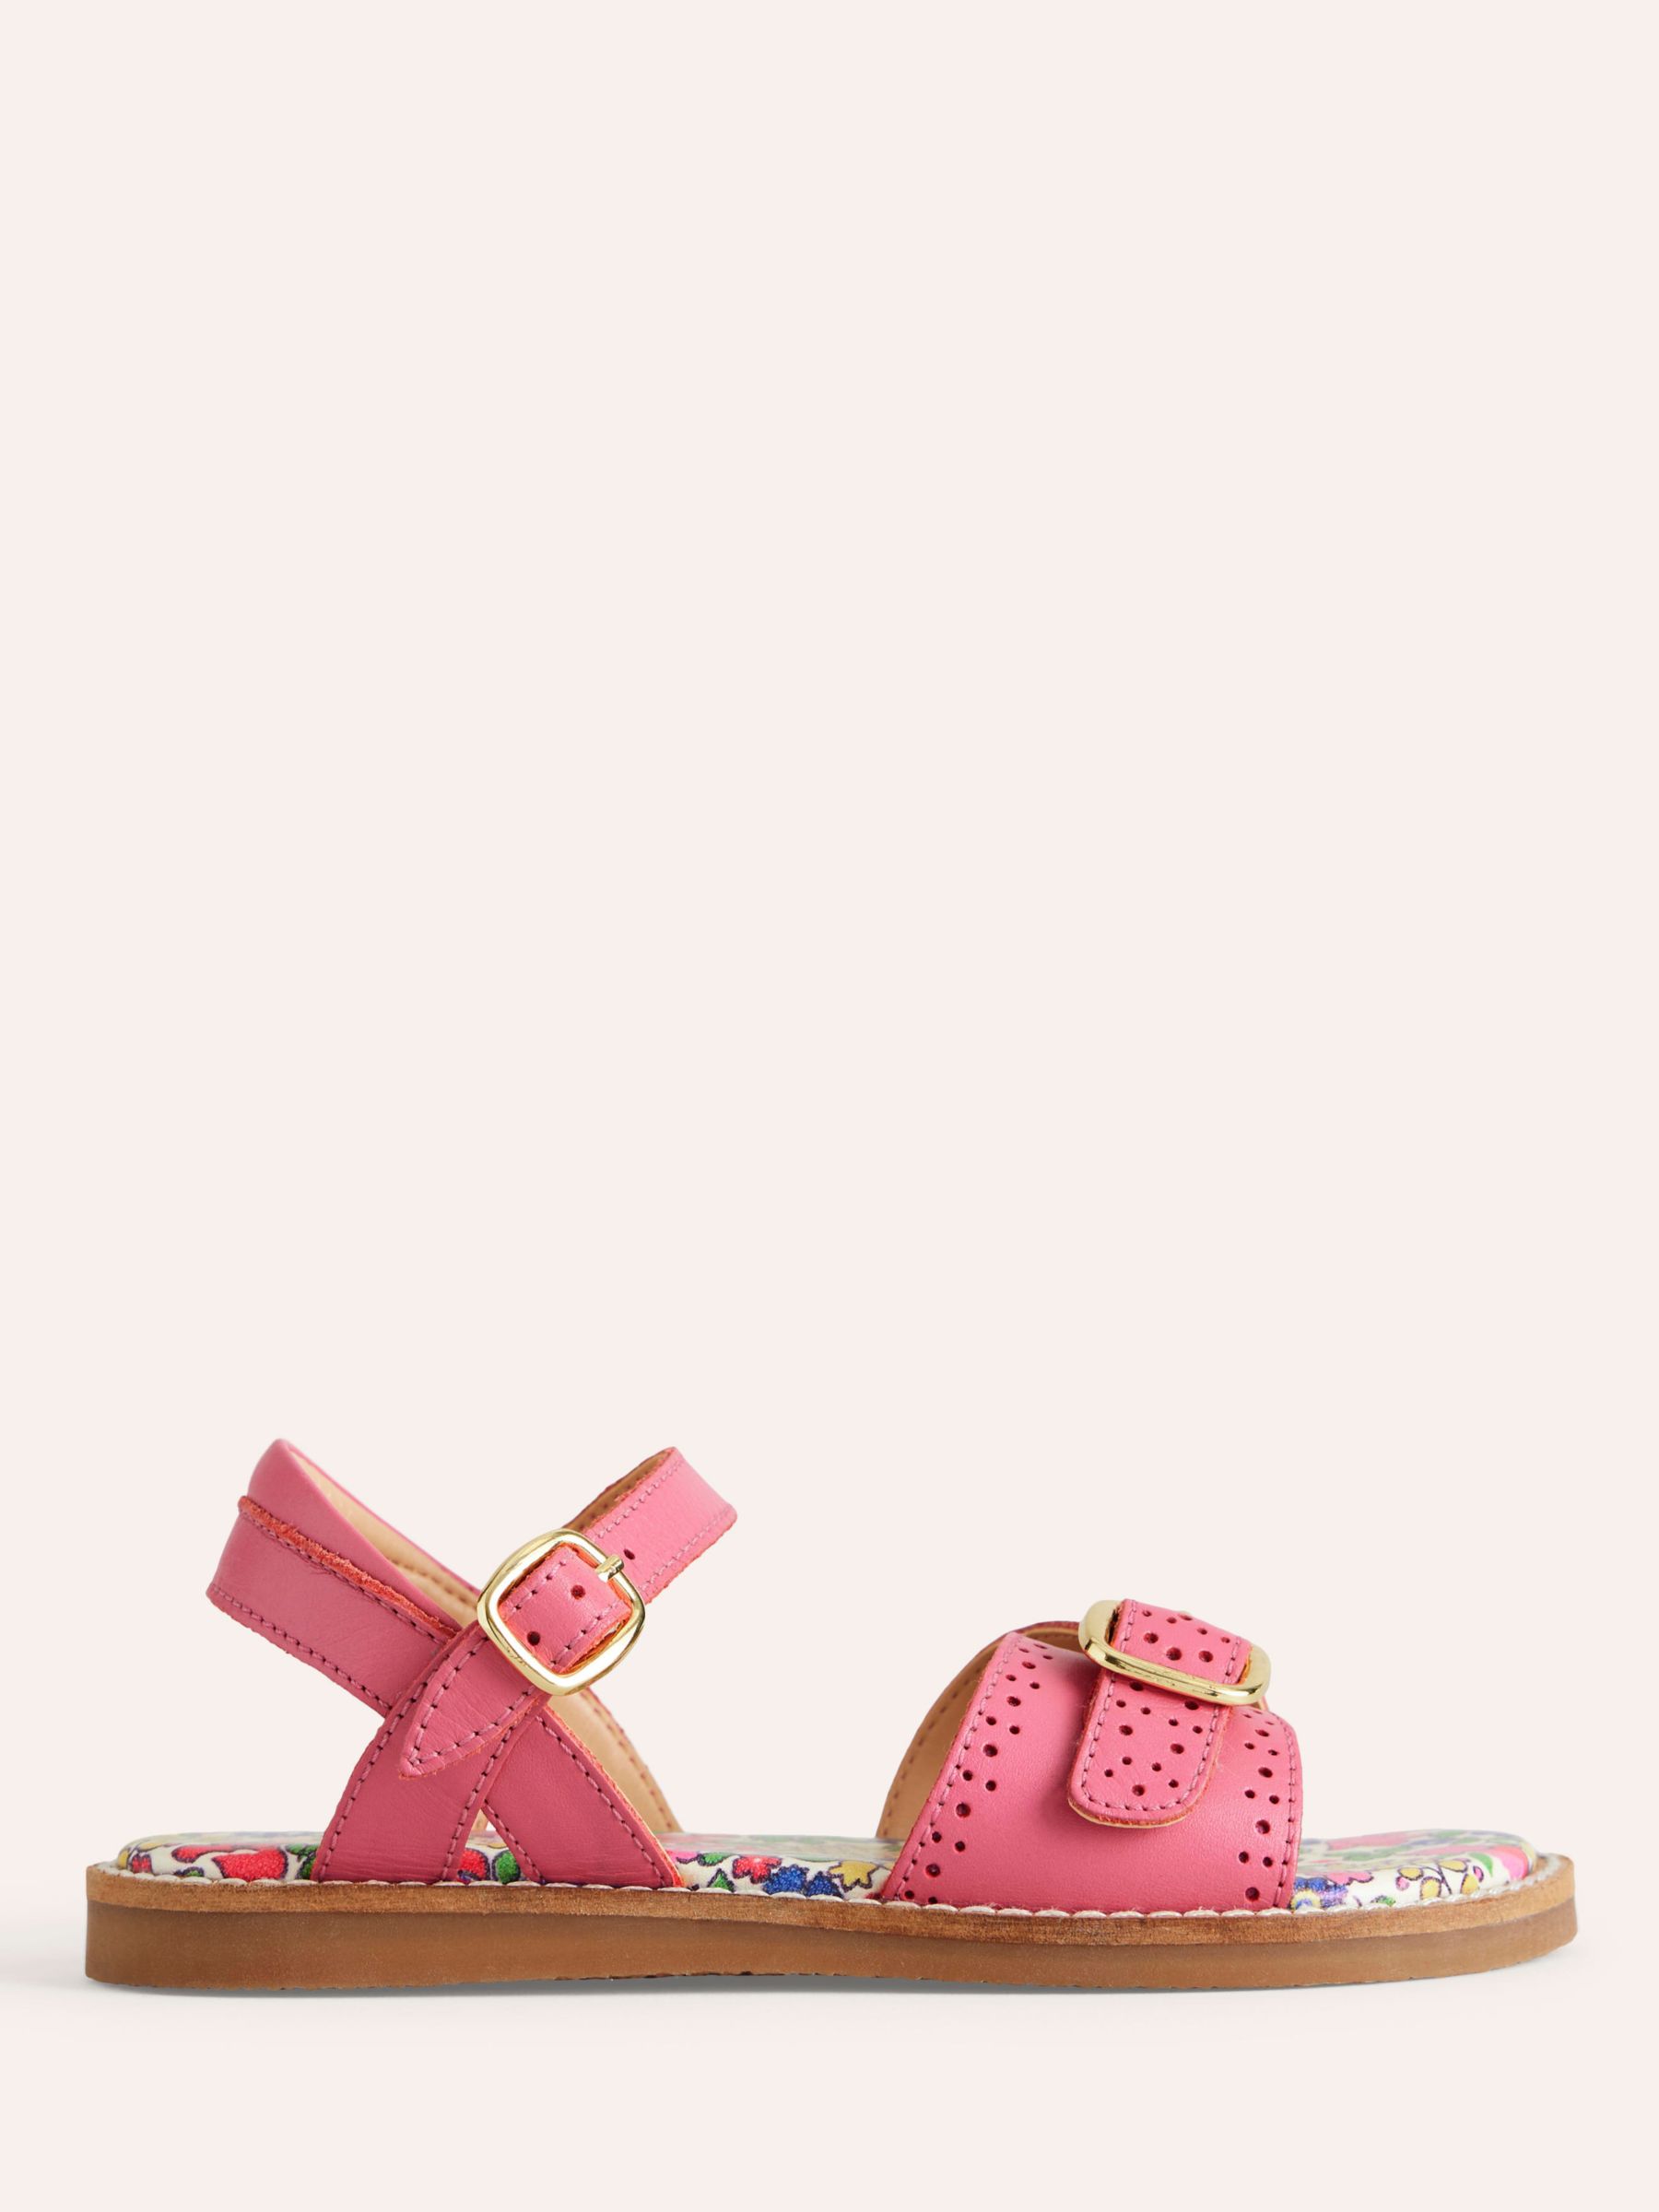 Mini Boden Kids' Leather Buckle Sandals, Pink, 2.5